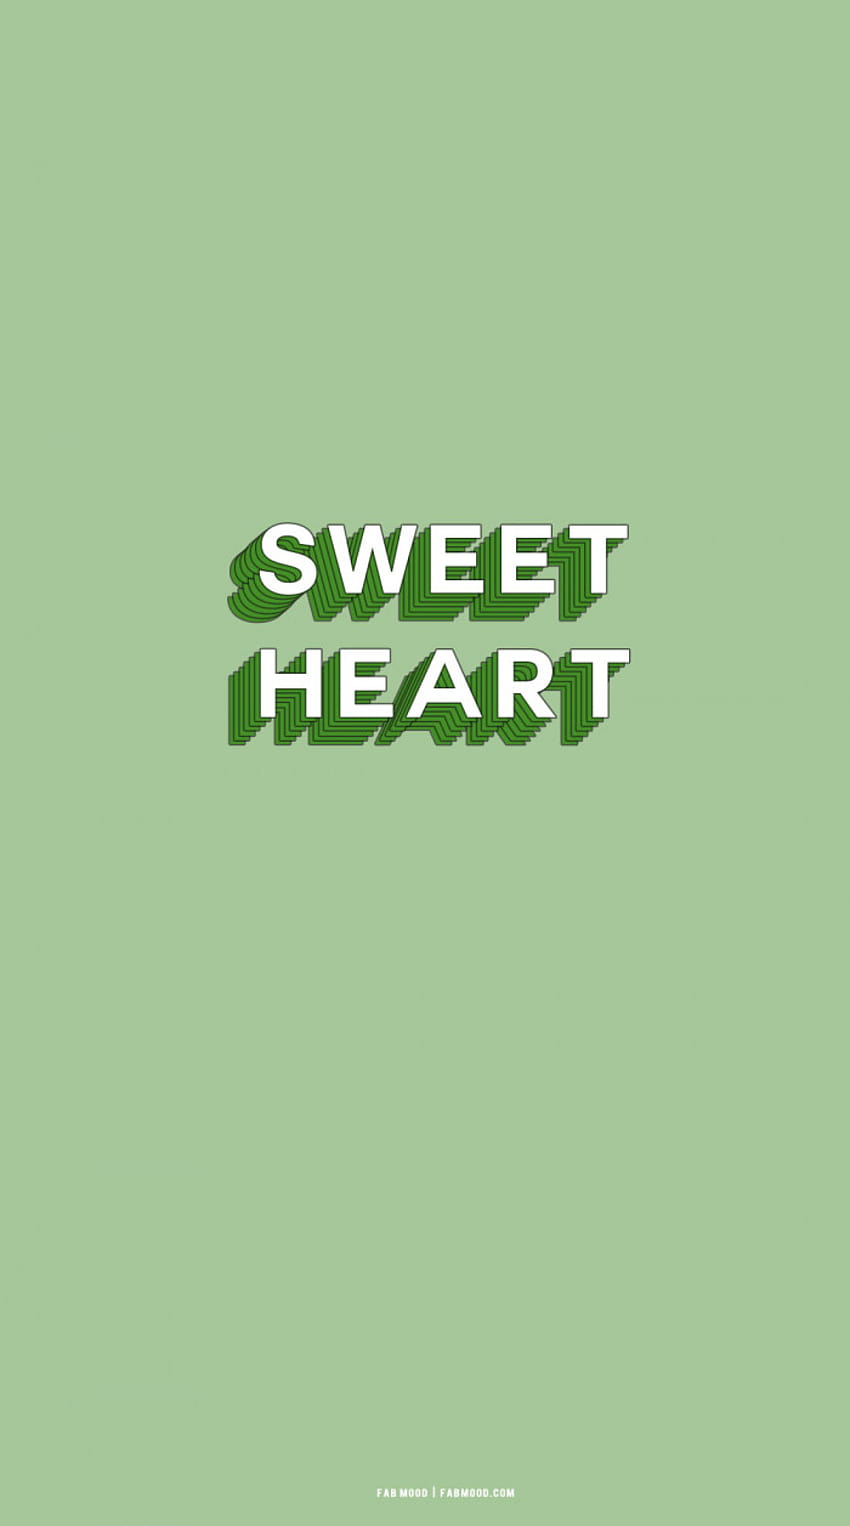 20 Cute Spring for Phone & Iphone : Sweetheart Sage Green Backgrounds 1, sage aesthetic HD phone wallpaper